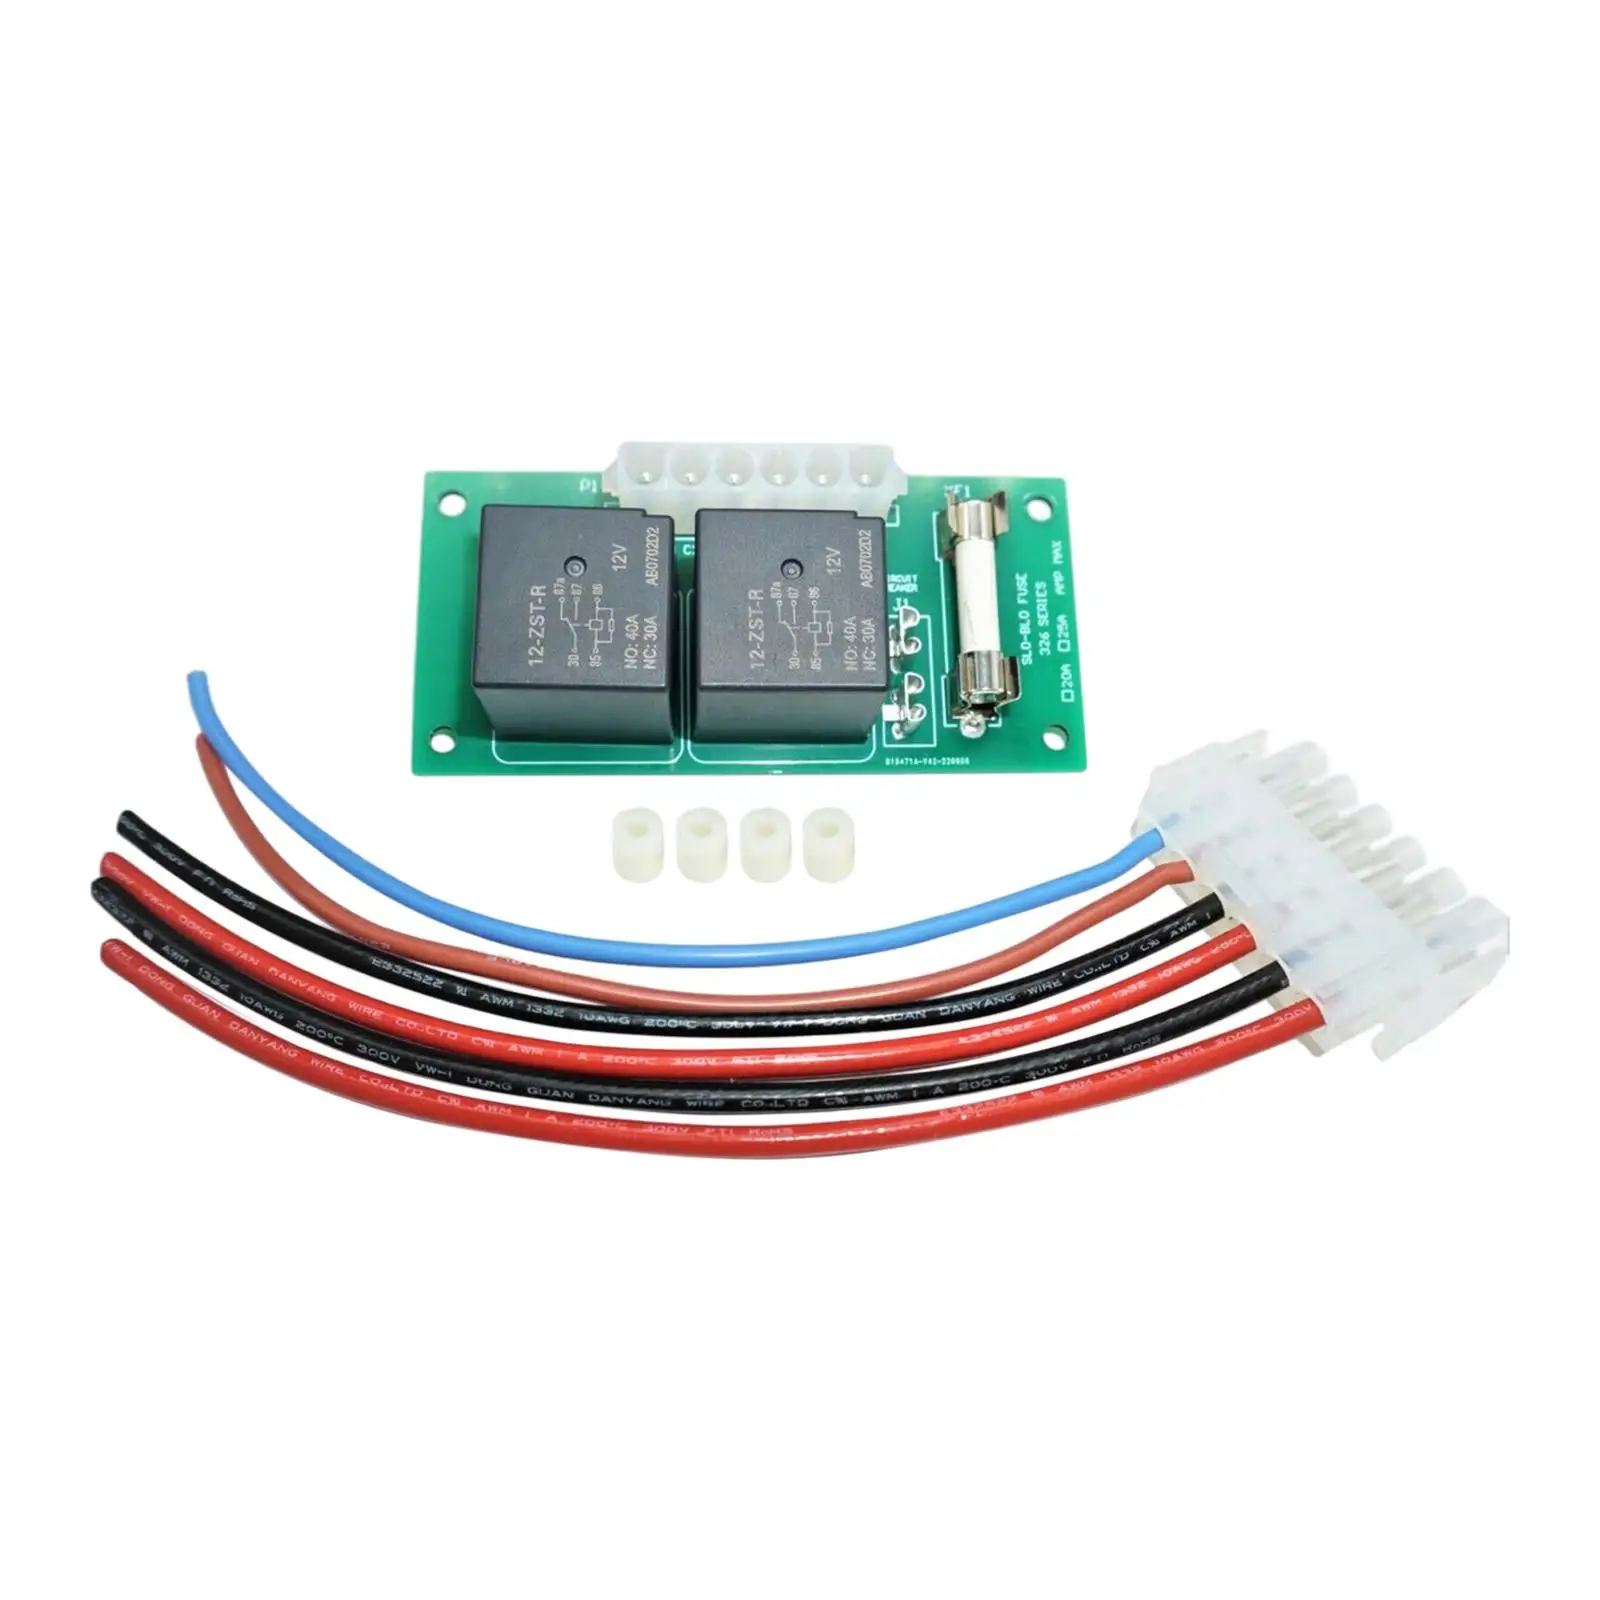 140-1130 Slide Out Relay Control Board Lightweight Wire Harness Controller